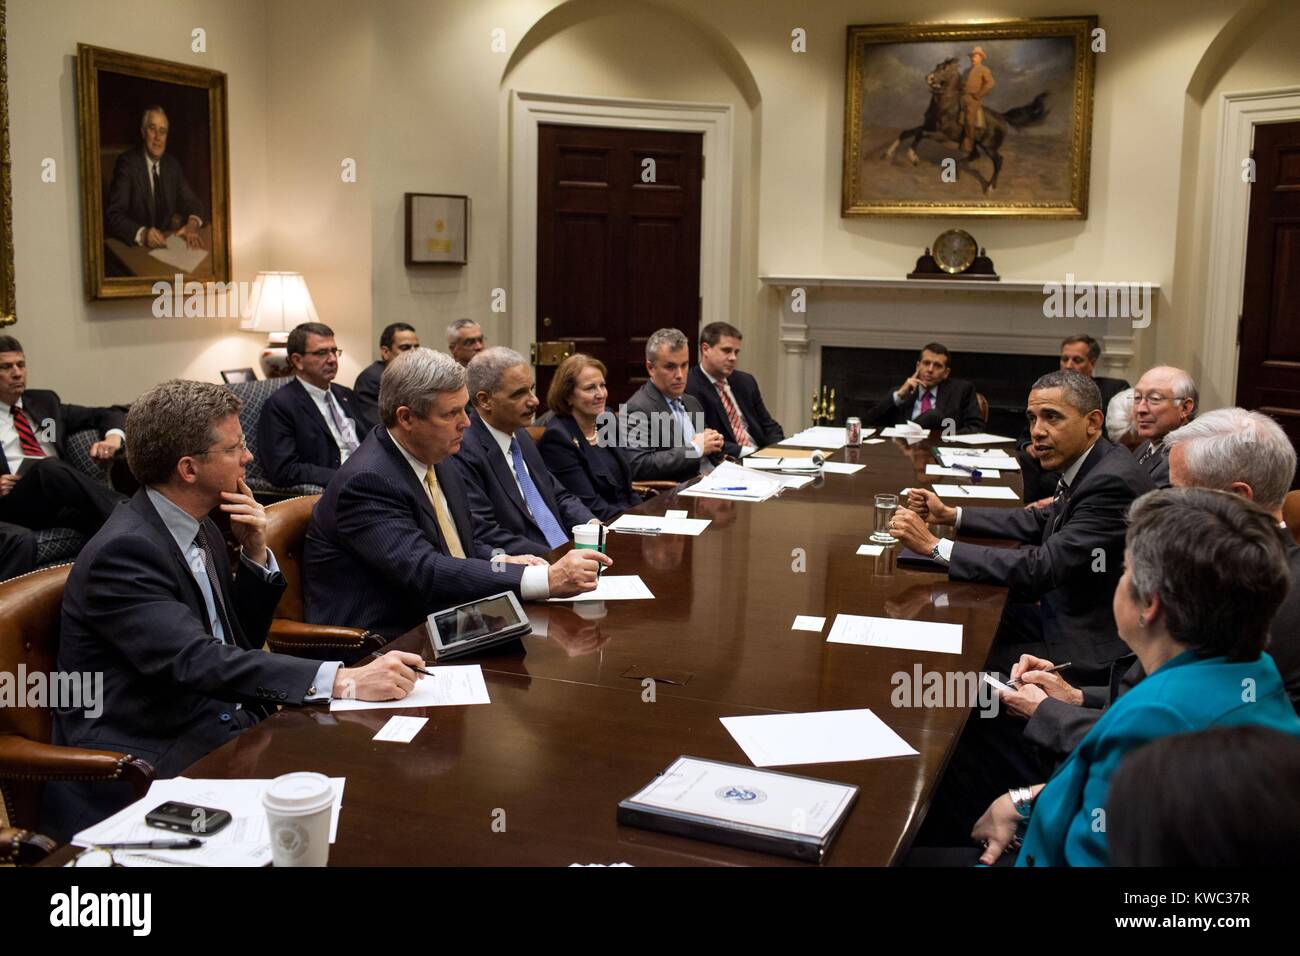 President Barack Obama meeting with 2nd Term Cabinet, April 26, 2012. Seated clockwise from President: John Bryson, Commerce; Janet Napolitano, Homeland Security; Shaun Donovan, Housing and Urban Development; Tom Vilsack, Agriculture; Eric H. Holder, Jr. Atty. Gen.; Karen Mills, Small Business Admin.; Jeff Zients, Office of Management and Budget acting Dir.; Dan Pfeiffer, Director of Communications; David Plouffe, Senior Advisor ; Mark Childress, Dep. Chief of Staff for Planning; Kathleen Sebelius, Health and Human Services; and Interior Ken Salazar, Interior. (BSLOC 2015 13 242) Stock Photo